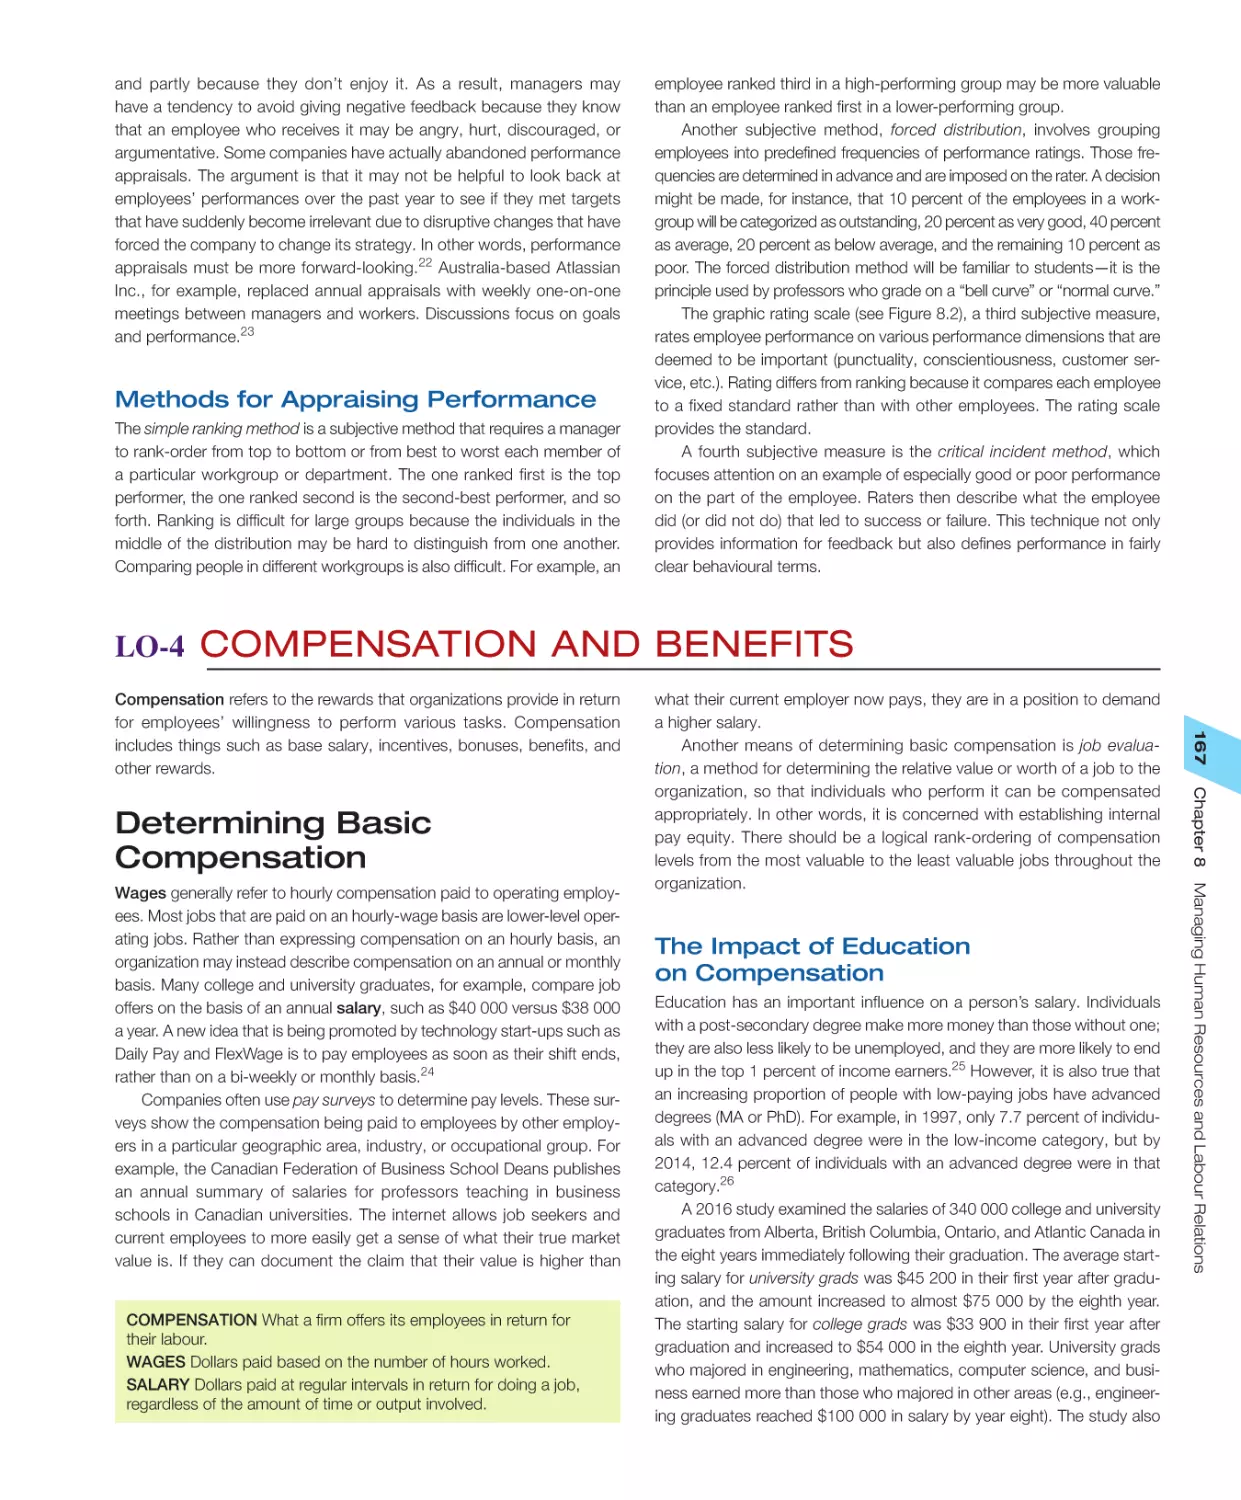 LO‐4 Compensation and Benefits